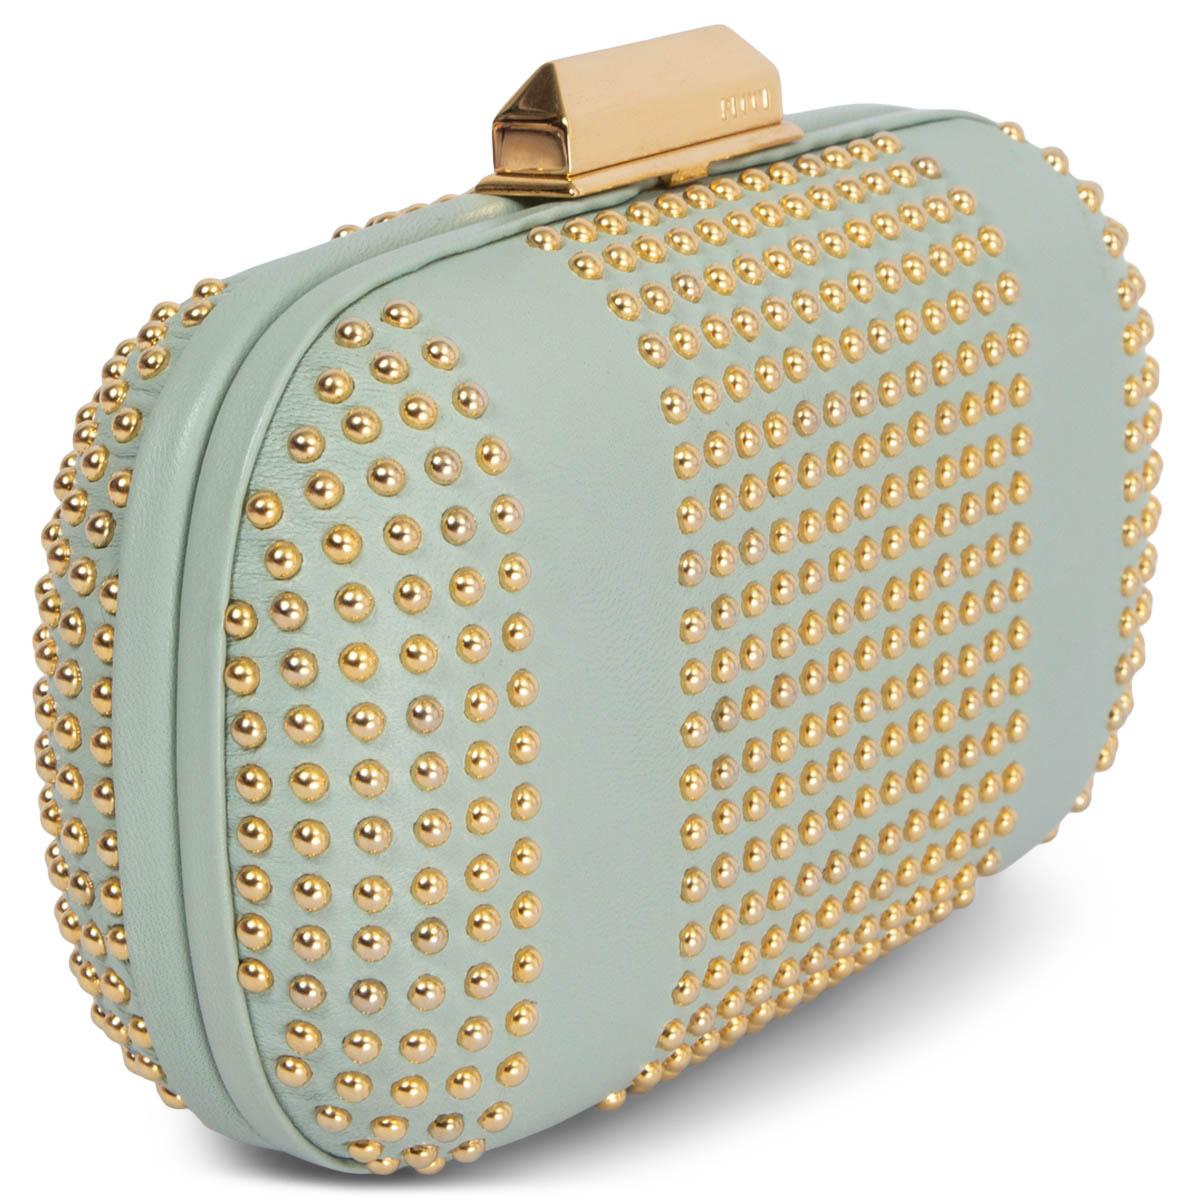 100% authentic Emilio Pucci box clutch in pale mint calfskin featuring gold-tone studs and frame closure. Lined in a classic Emilio Pucci fabric in pale lilac, blue and turquoise silk fabric. Has been carried and is in excellent condition.